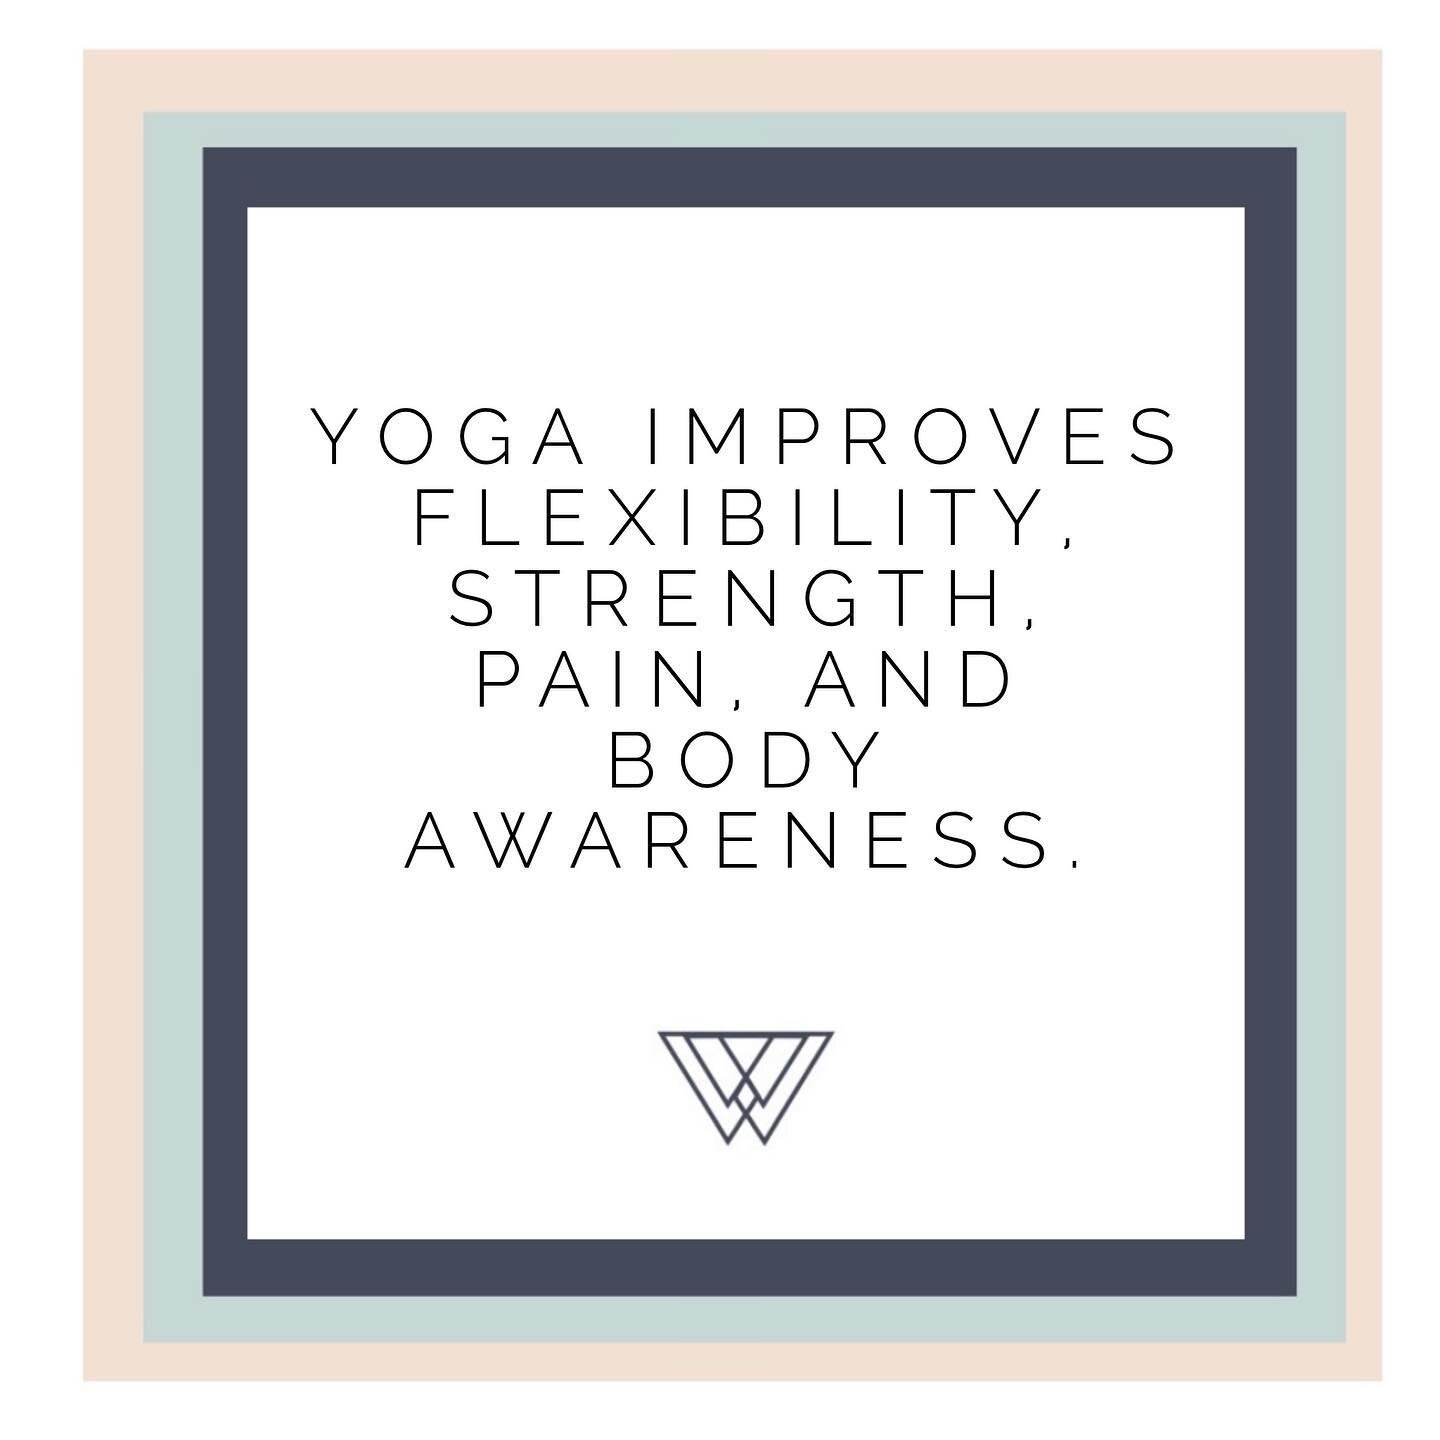 We love yoga as a complementary therapy to treat various aches/pains!

Research shows the positive effects include improvements in flexibility, muscular strength, mental and physical relaxation, and body awareness. Yoga has been shown to have a signi